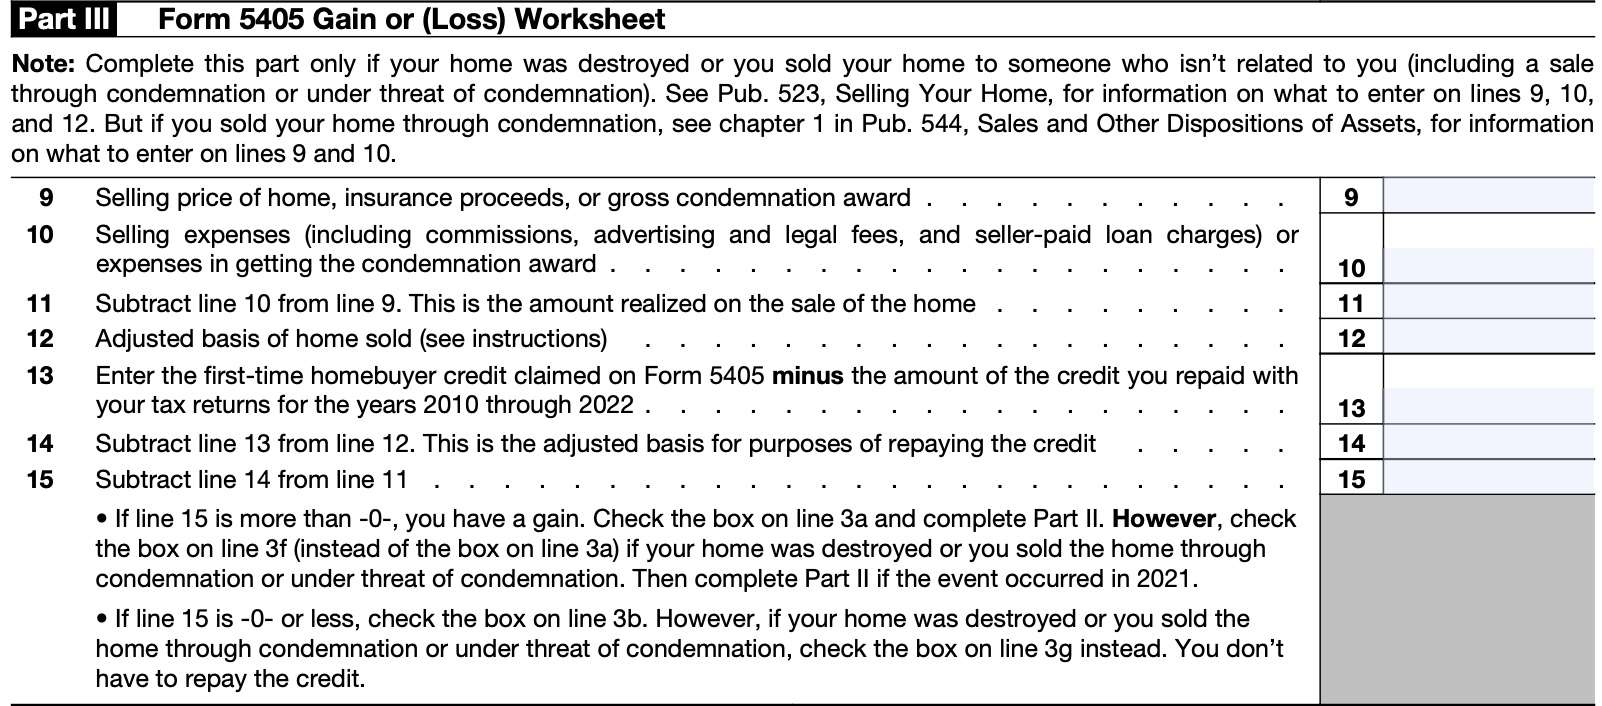 irs form 5405 part iii: gain or loss worksheet